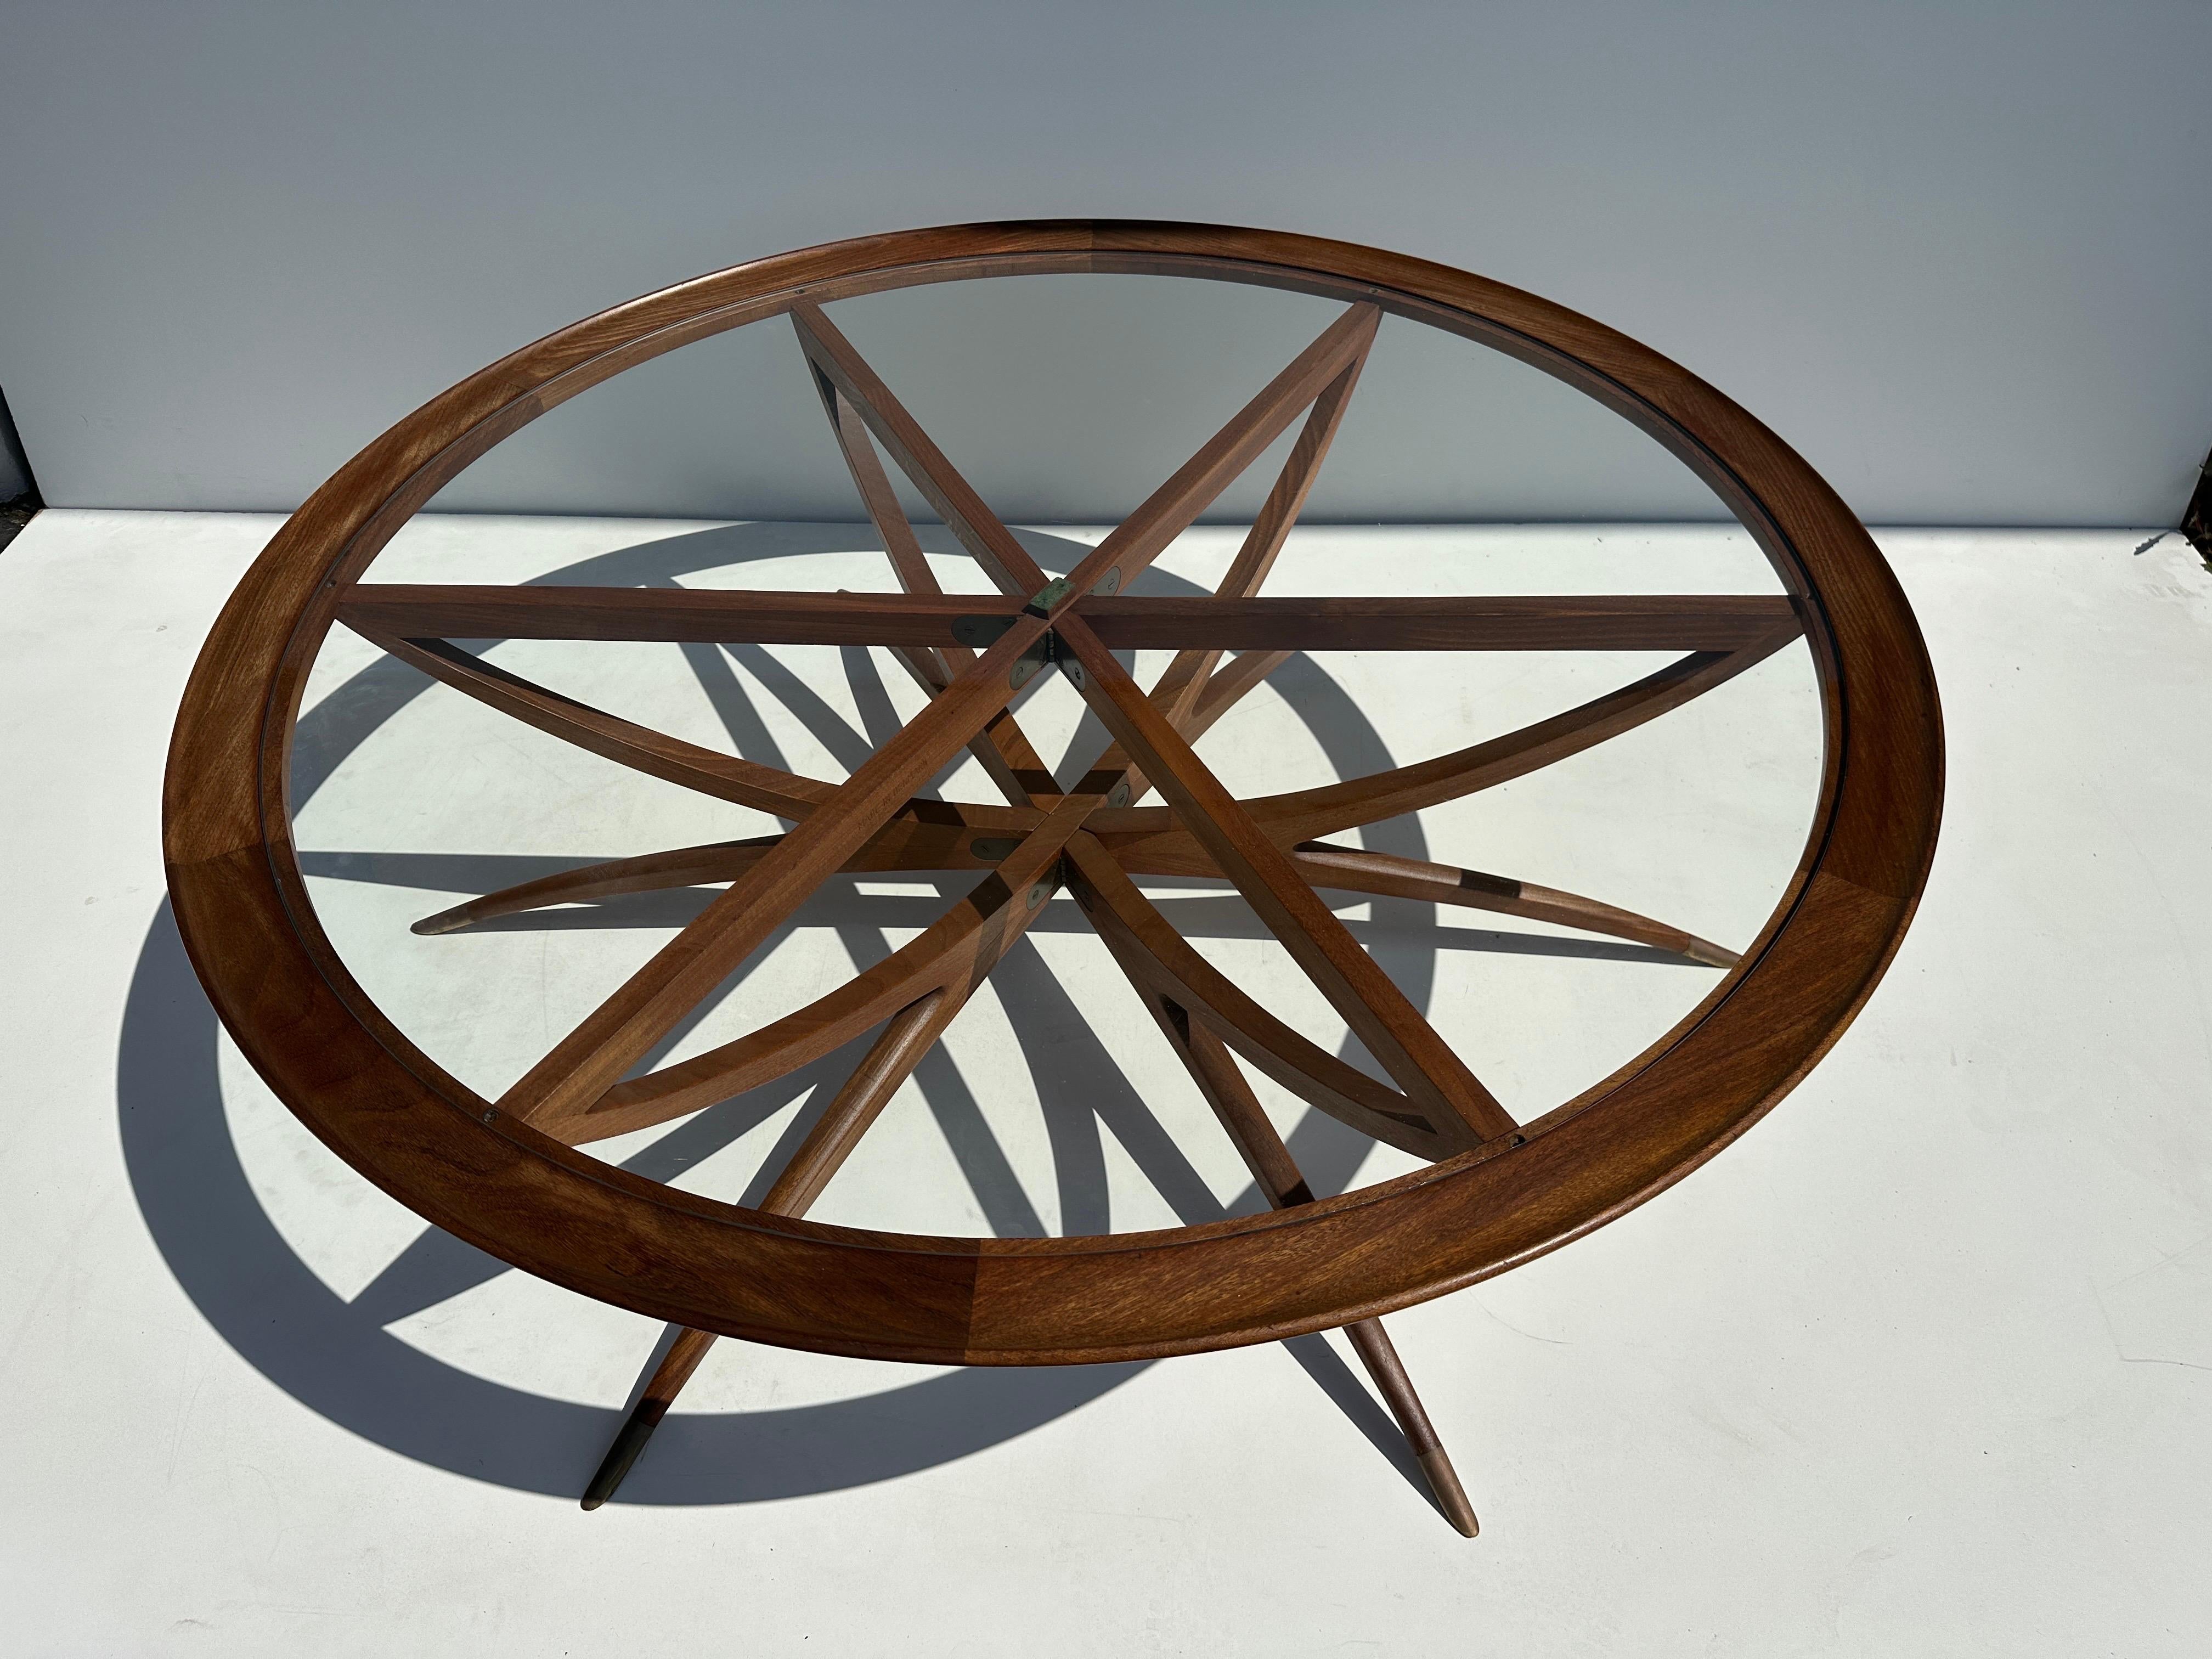 Danish teak spider leg coffee table with clear glass top and patinated brass sabot legs. Base folds for easy transportation and storage.
Similar to designs by Ico Parisi and Vladimir Kagan.